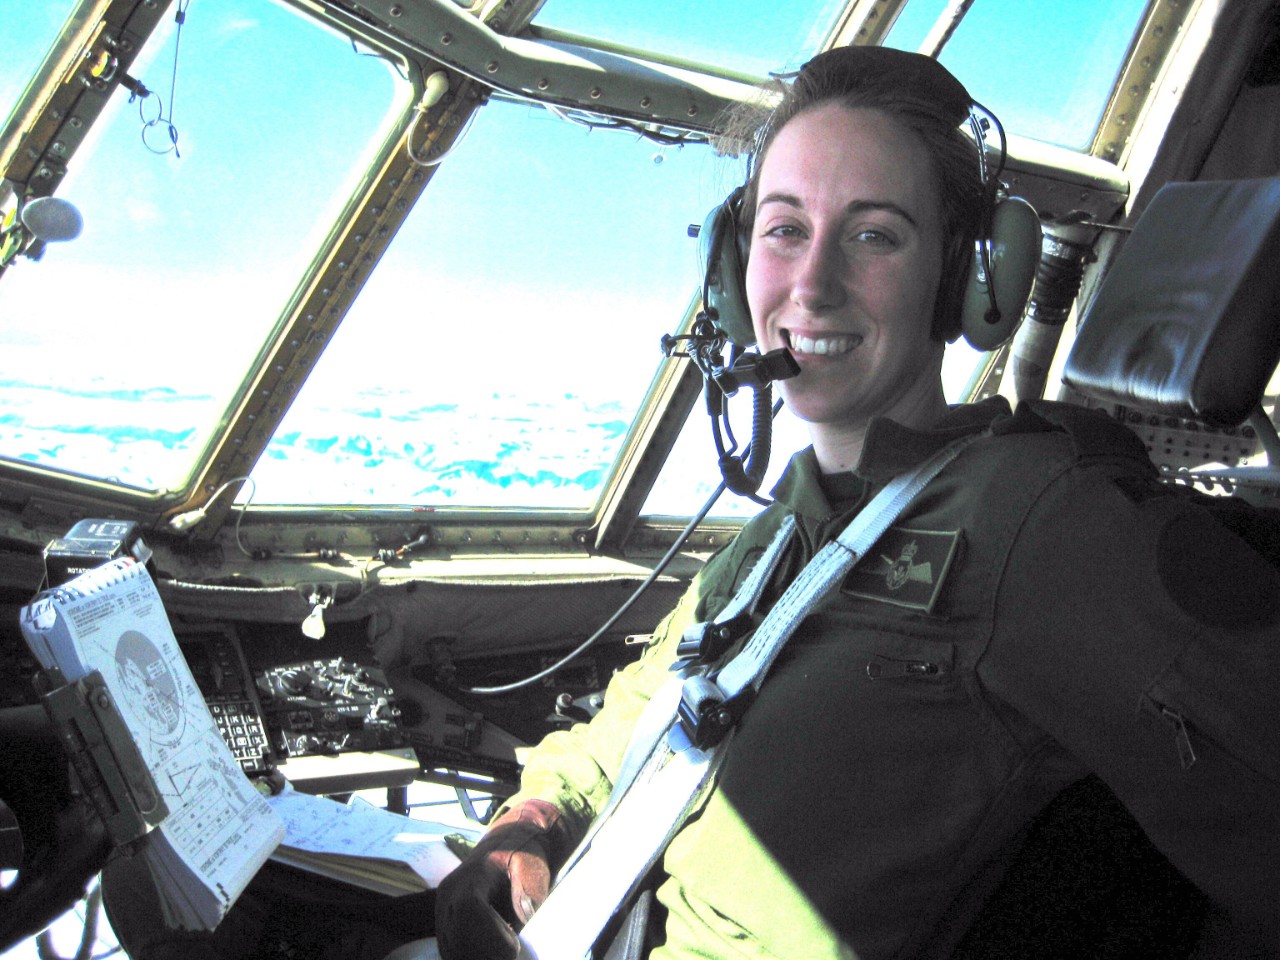 Kathryn Nurse, a female military pilot, smiles at the camera from the inside of a plane's cockpit